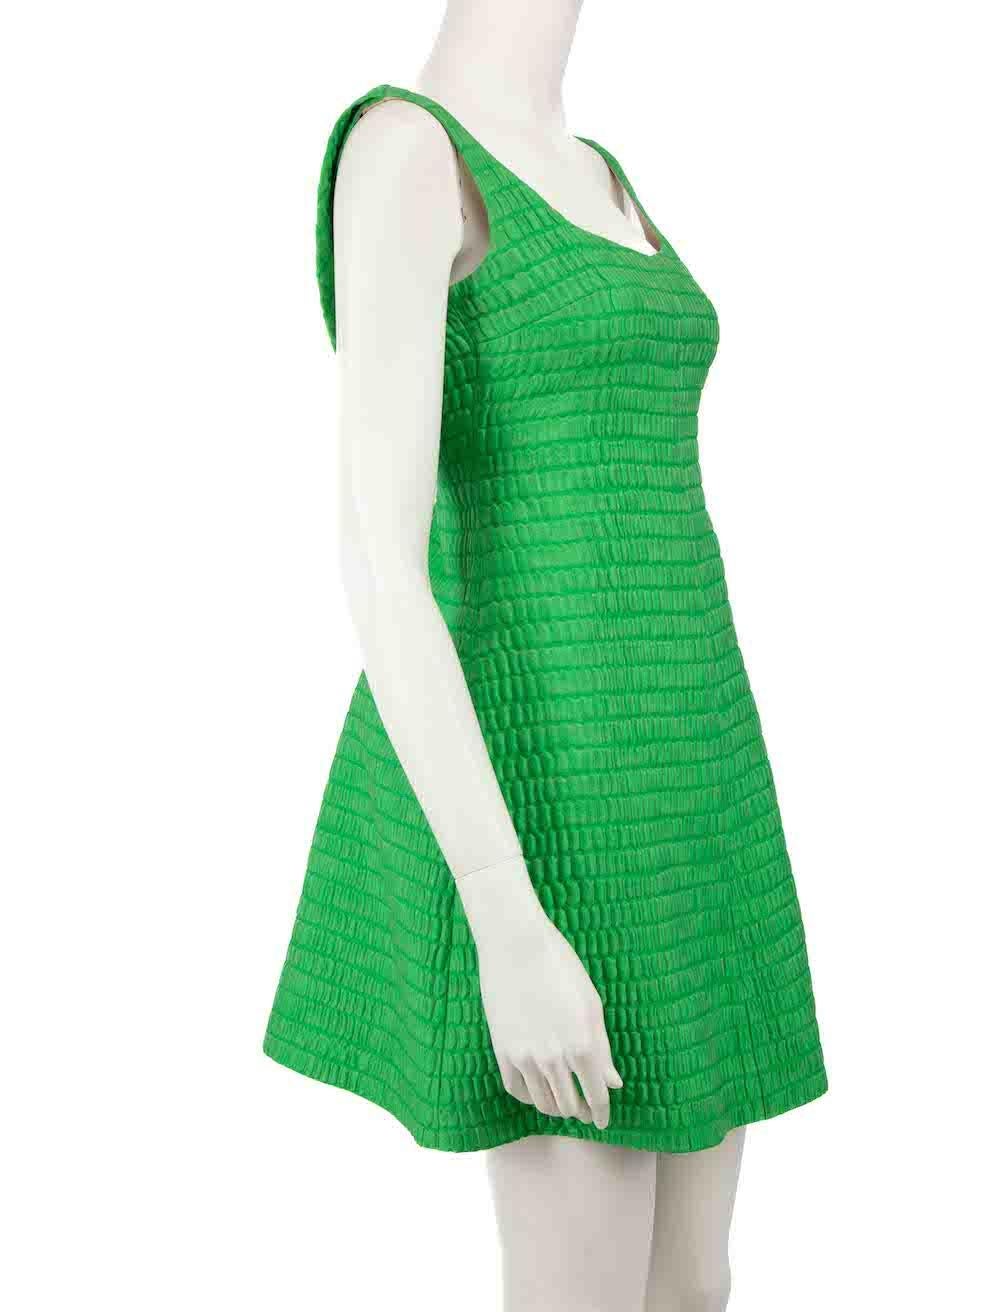 CONDITION is Very good. Minimal wear to dress is evident. Minimal wear to back lining with pilling on this used Emilia Wickstead designer resale item.
 
 
 
 Details
 
 
 Green
 
 Cotton
 
 Mini dress
 
 Textured
 
 Scoop neckline
 
 Open back
 
